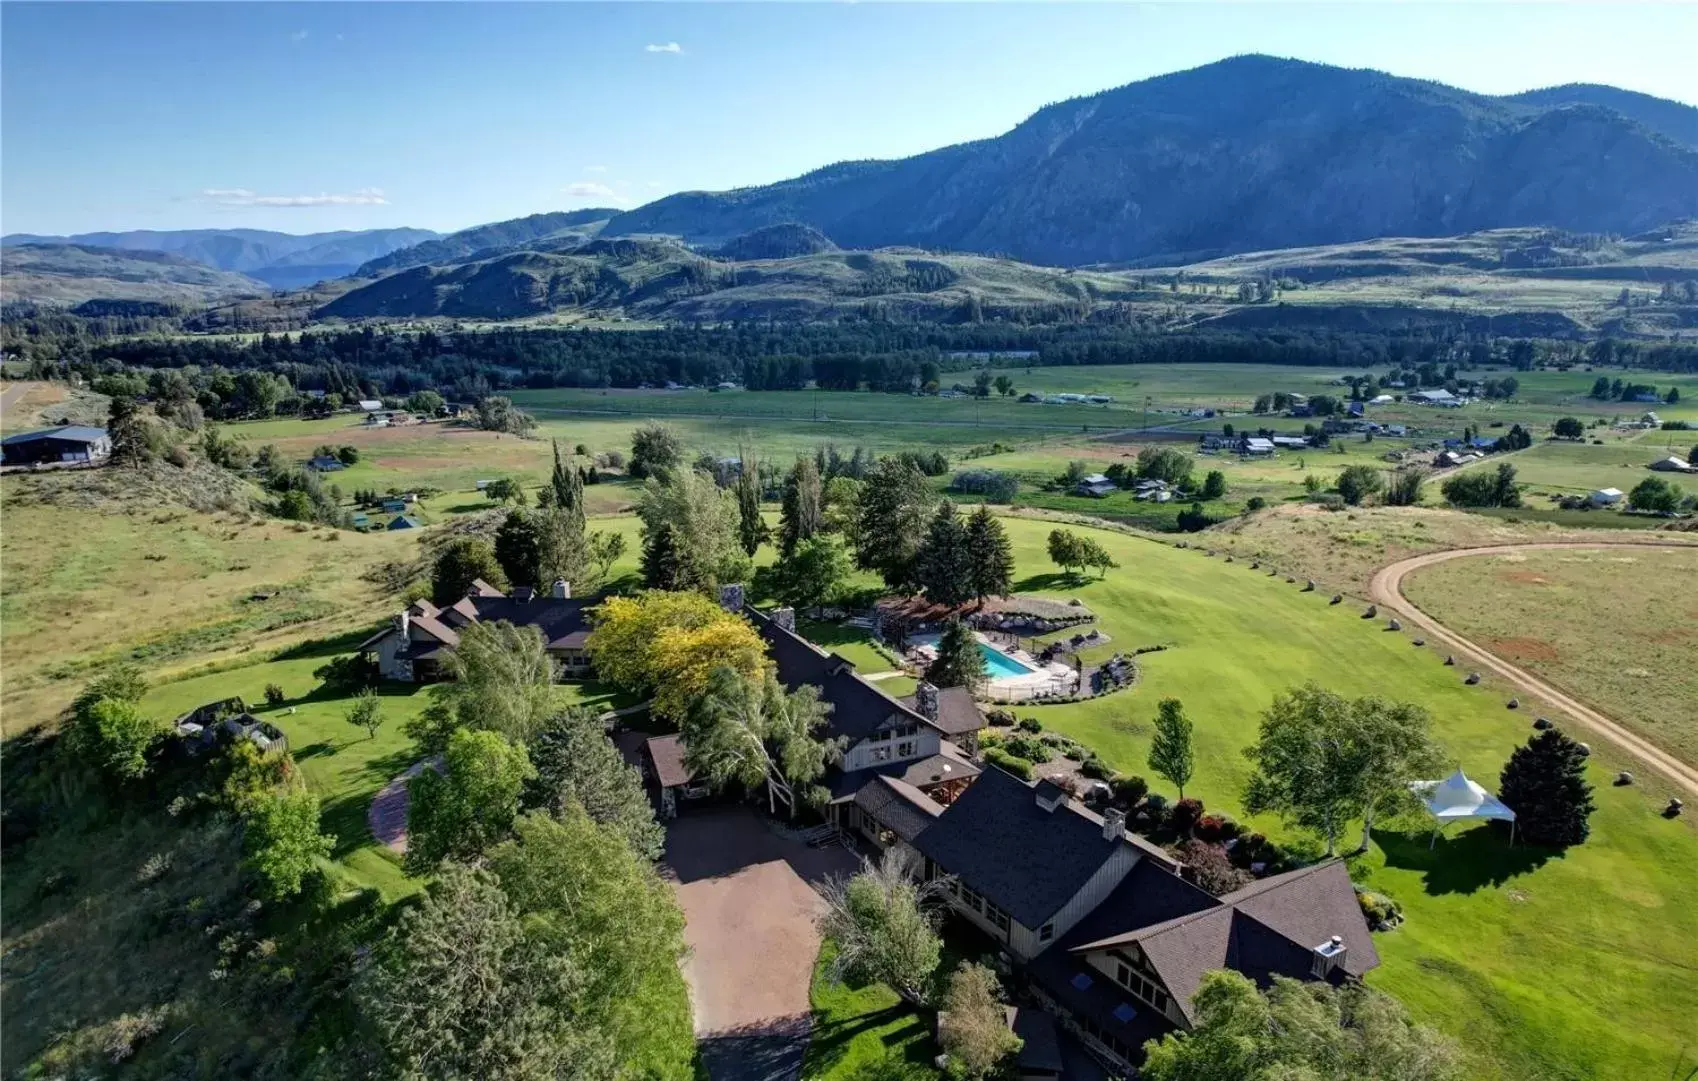 Property building, Bird's-eye View in Casia Lodge and Ranch